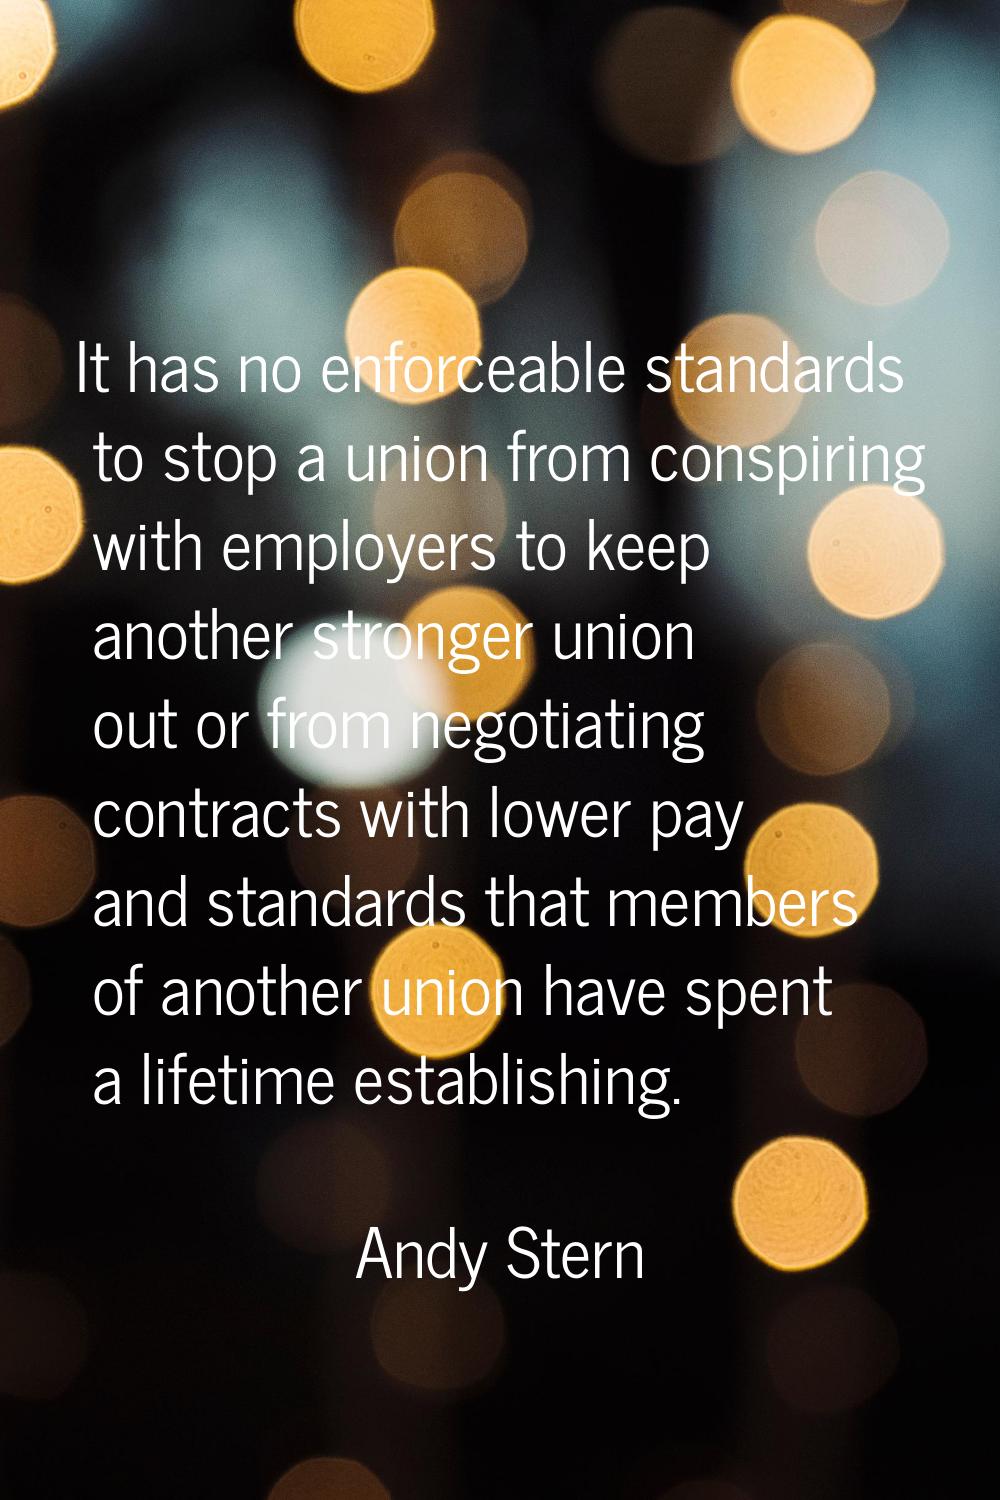 It has no enforceable standards to stop a union from conspiring with employers to keep another stro